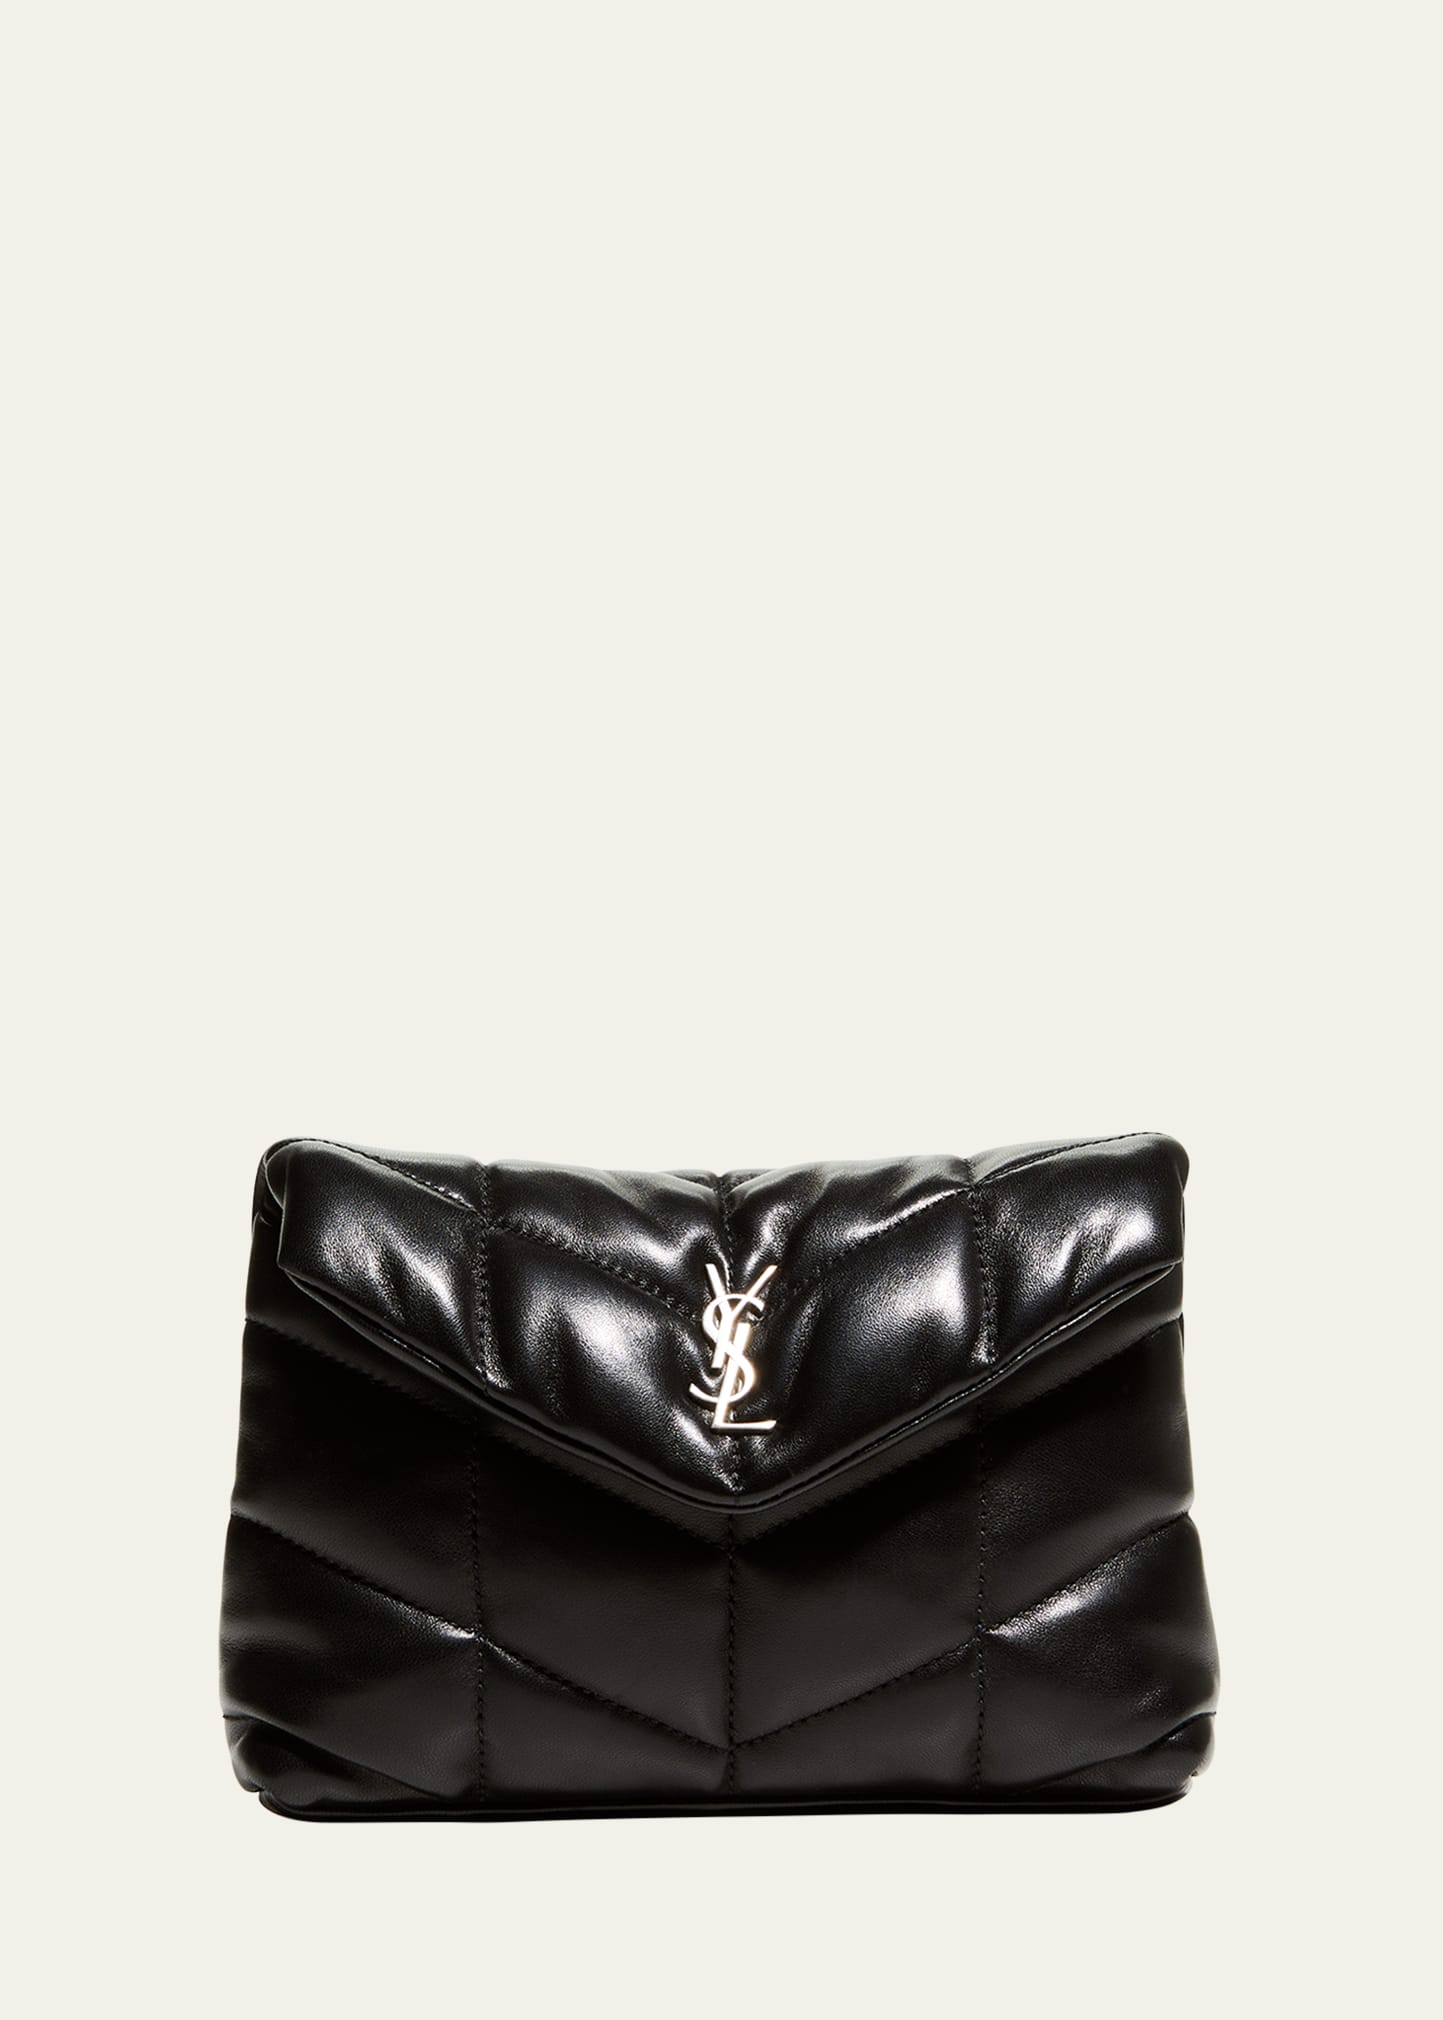 Lou Puffer YSL Pouch in Quilted Leather